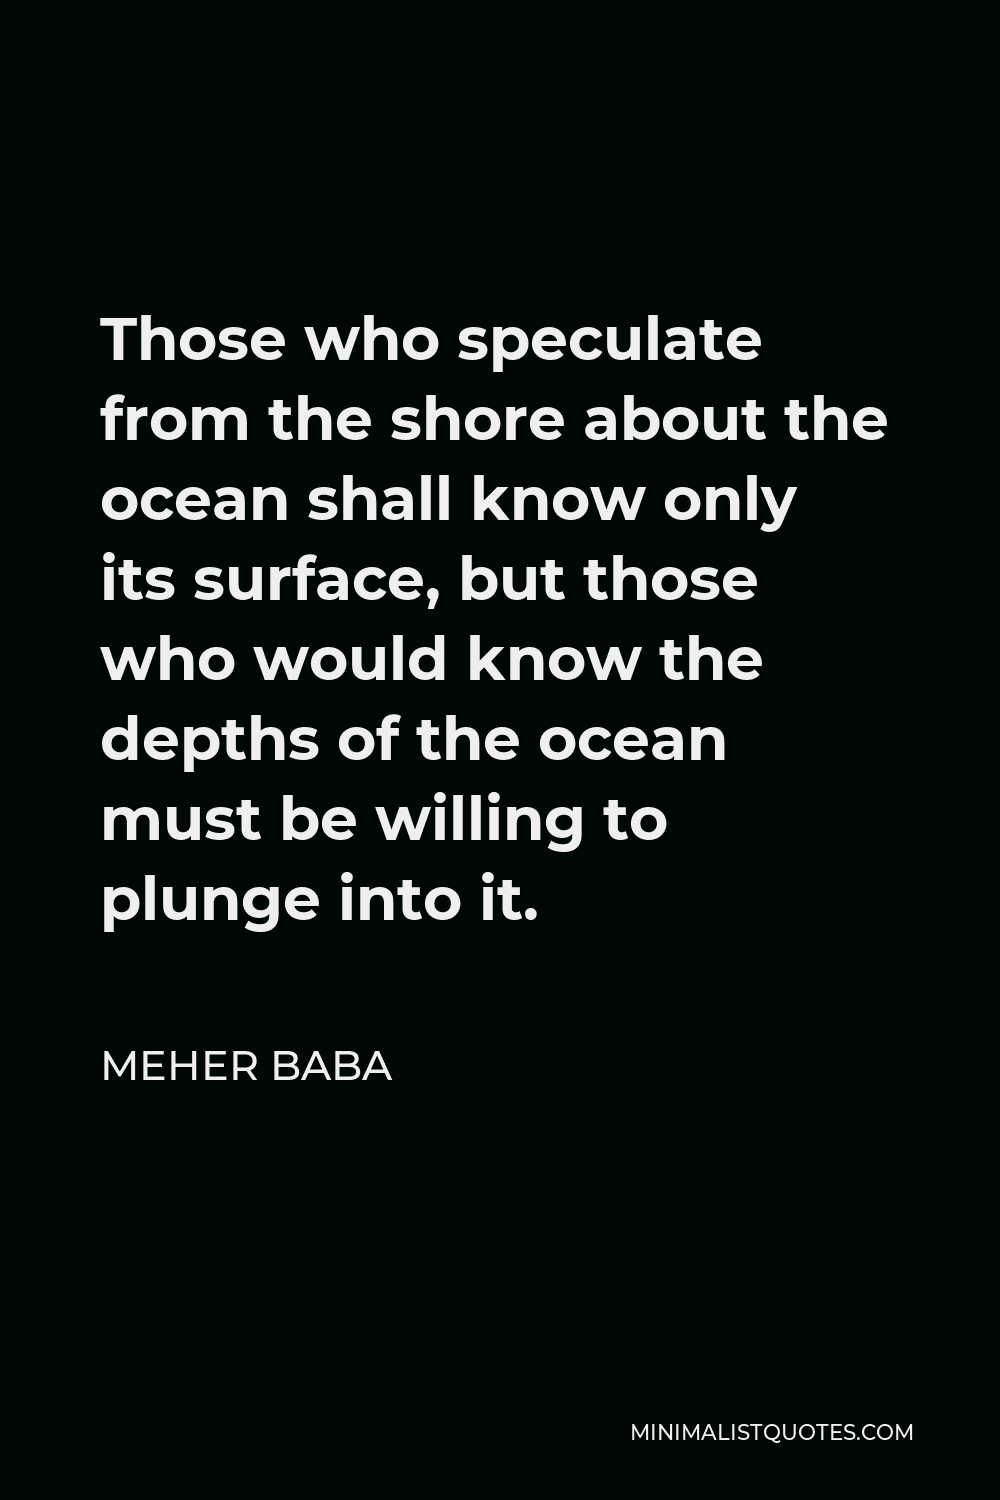 Meher Baba Quote - Those who speculate from the shore about the ocean shall know only its surface, but those who would know the depths of the ocean must be willing to plunge into it.